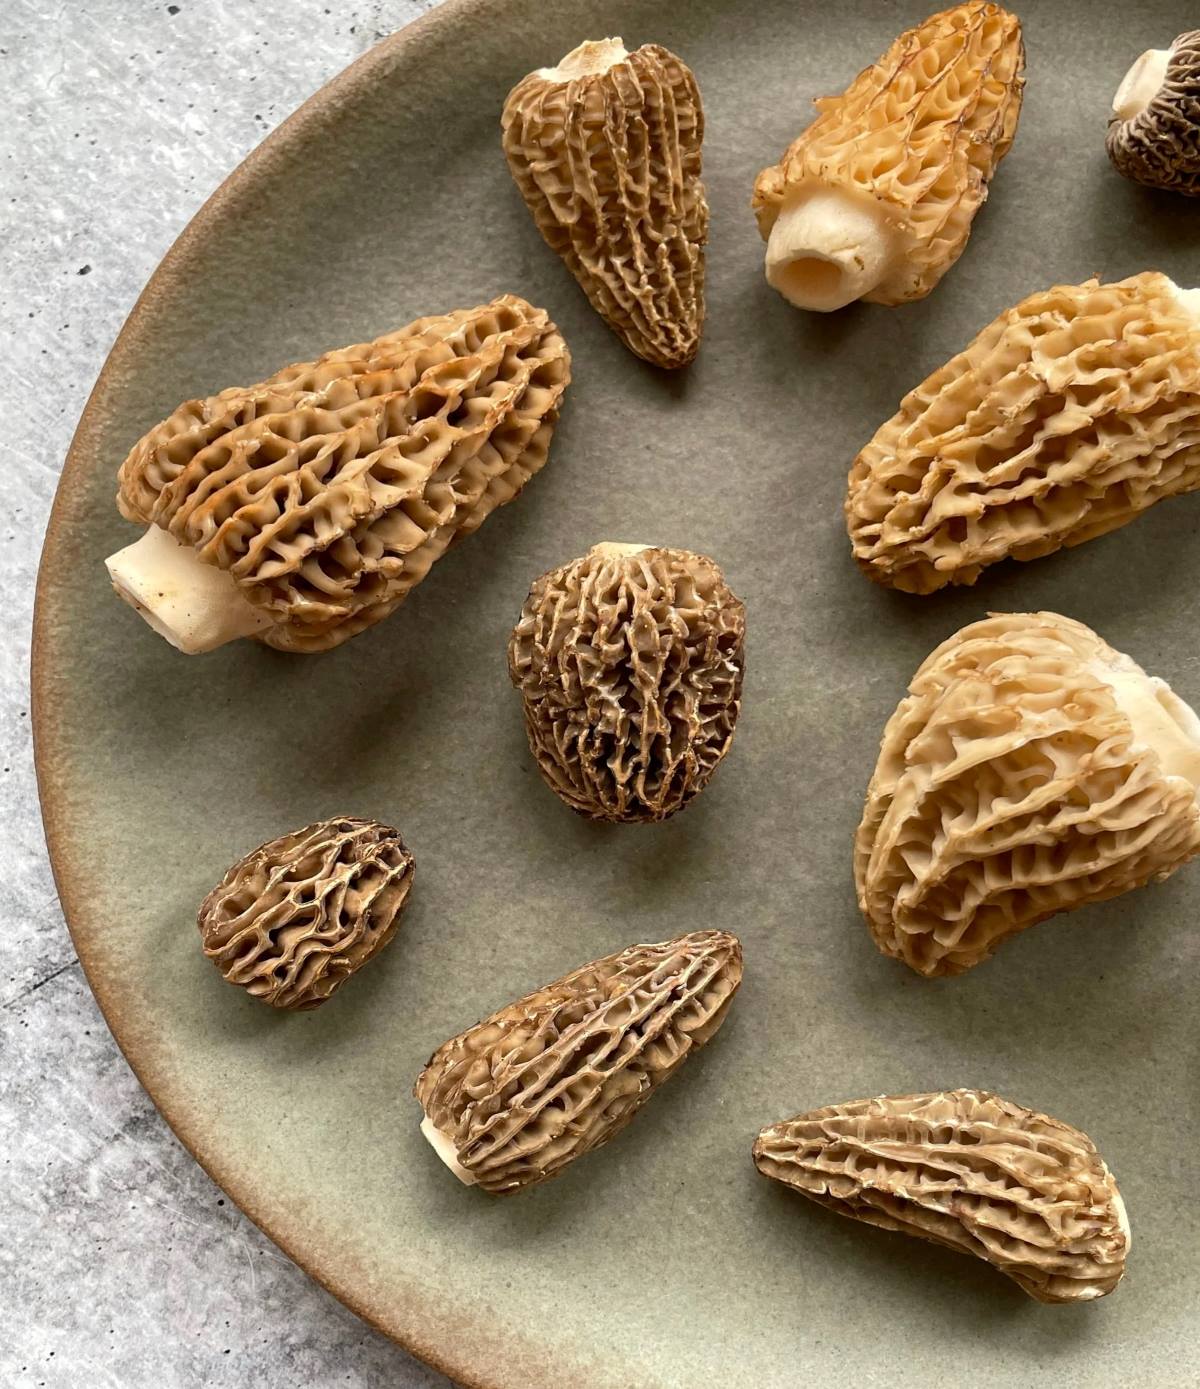 How To Store Morels In Refrigerator